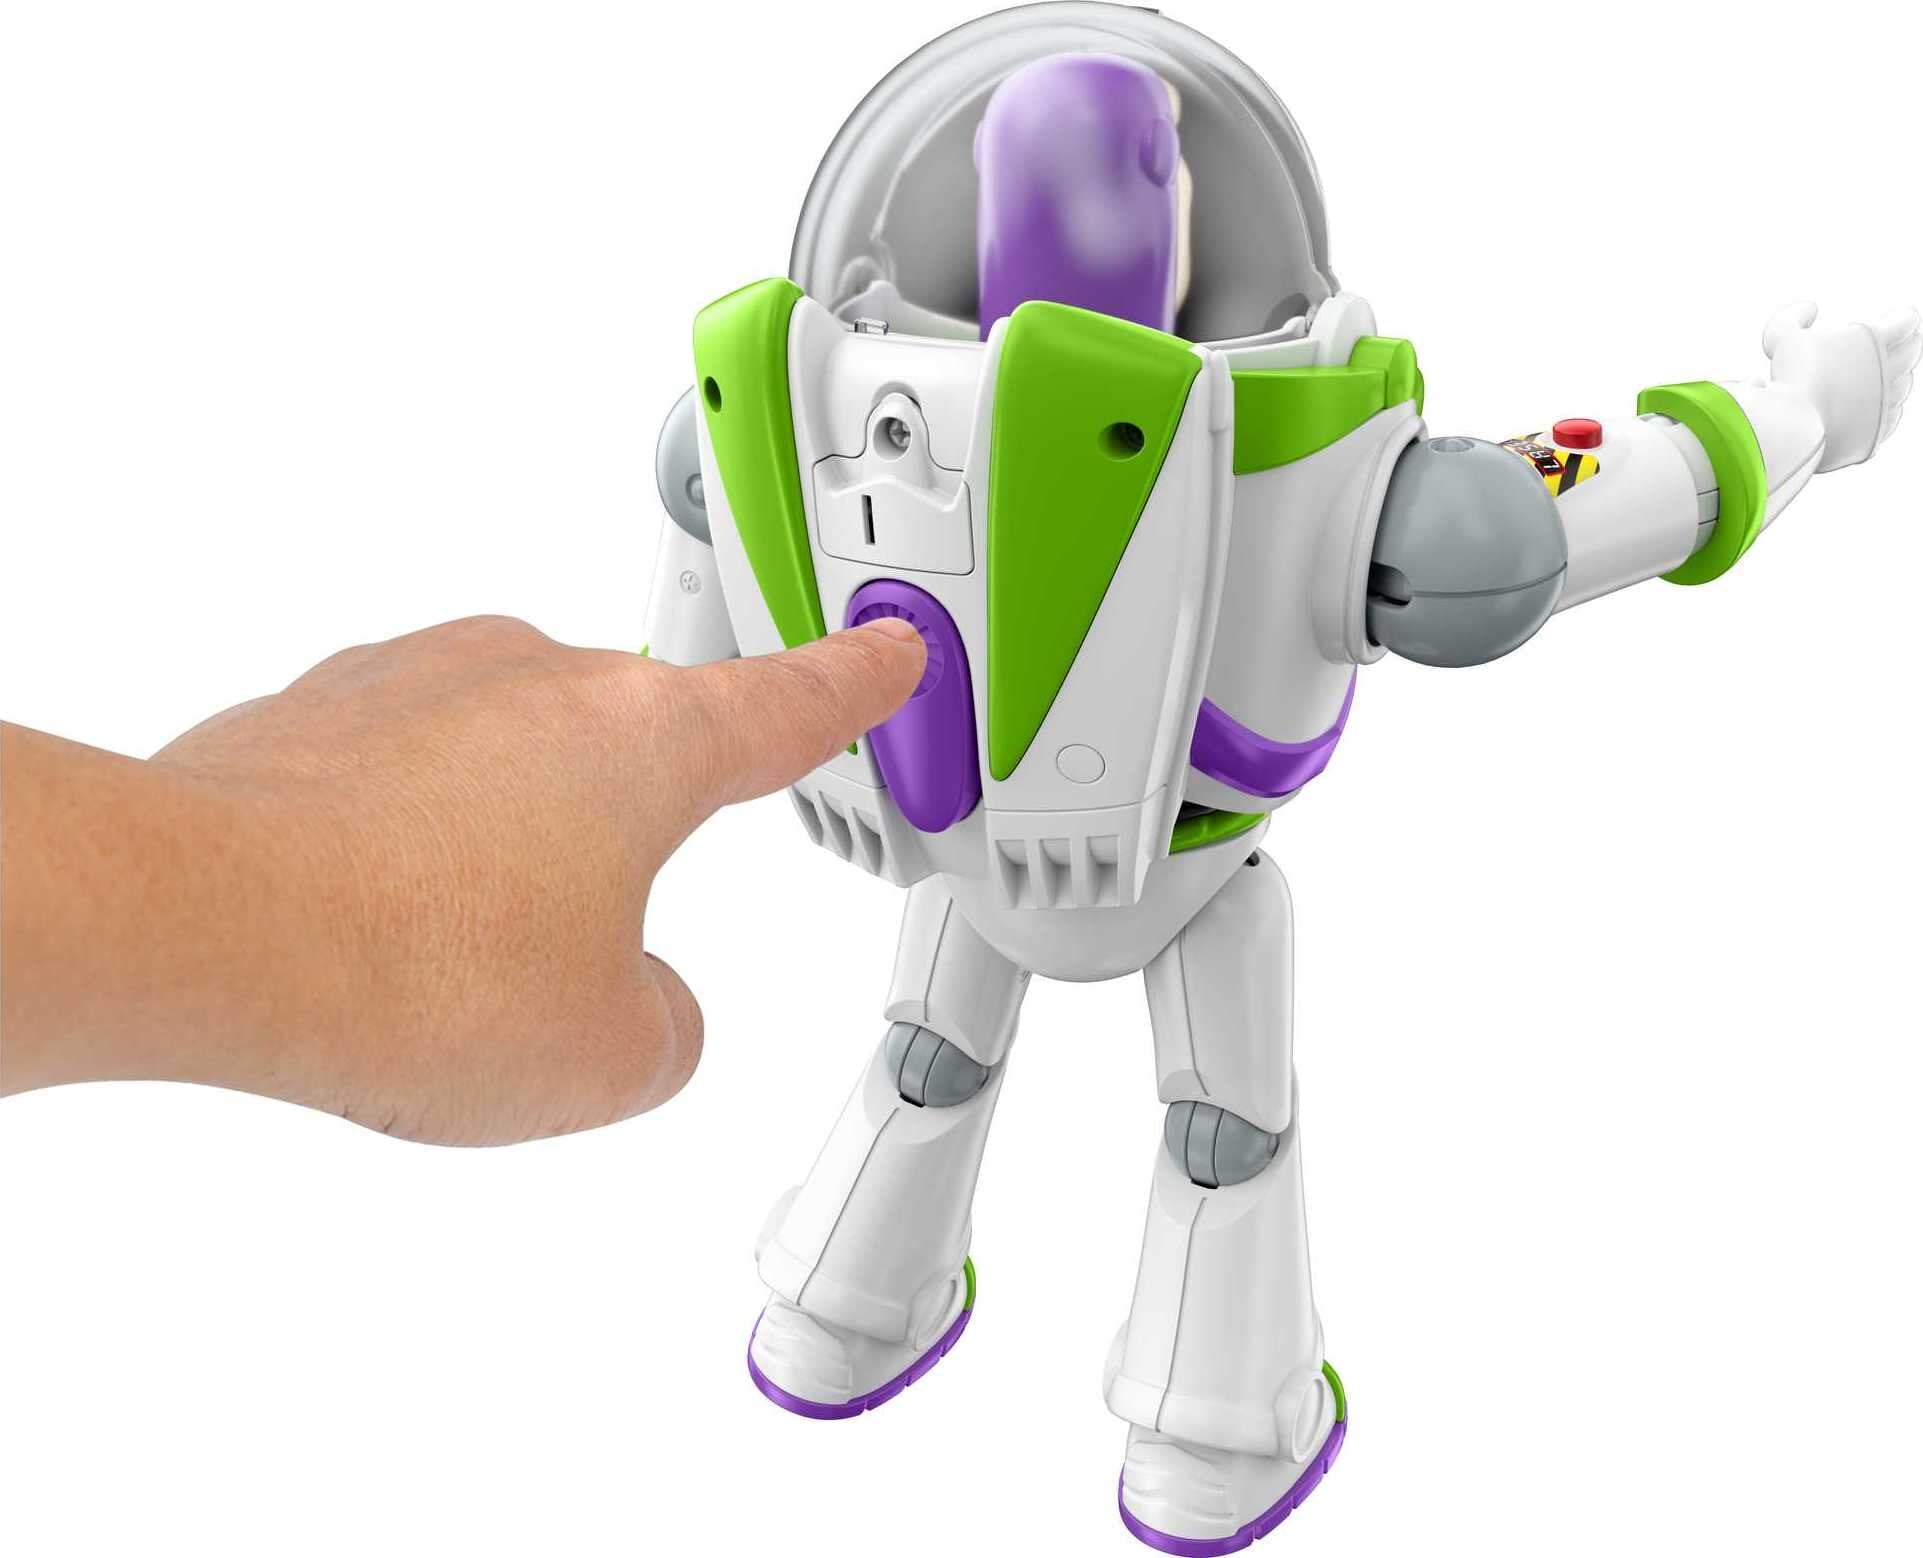 Disney Pixar Toy Story Action Chop Buzz Lightyear 12 In Scale Figure